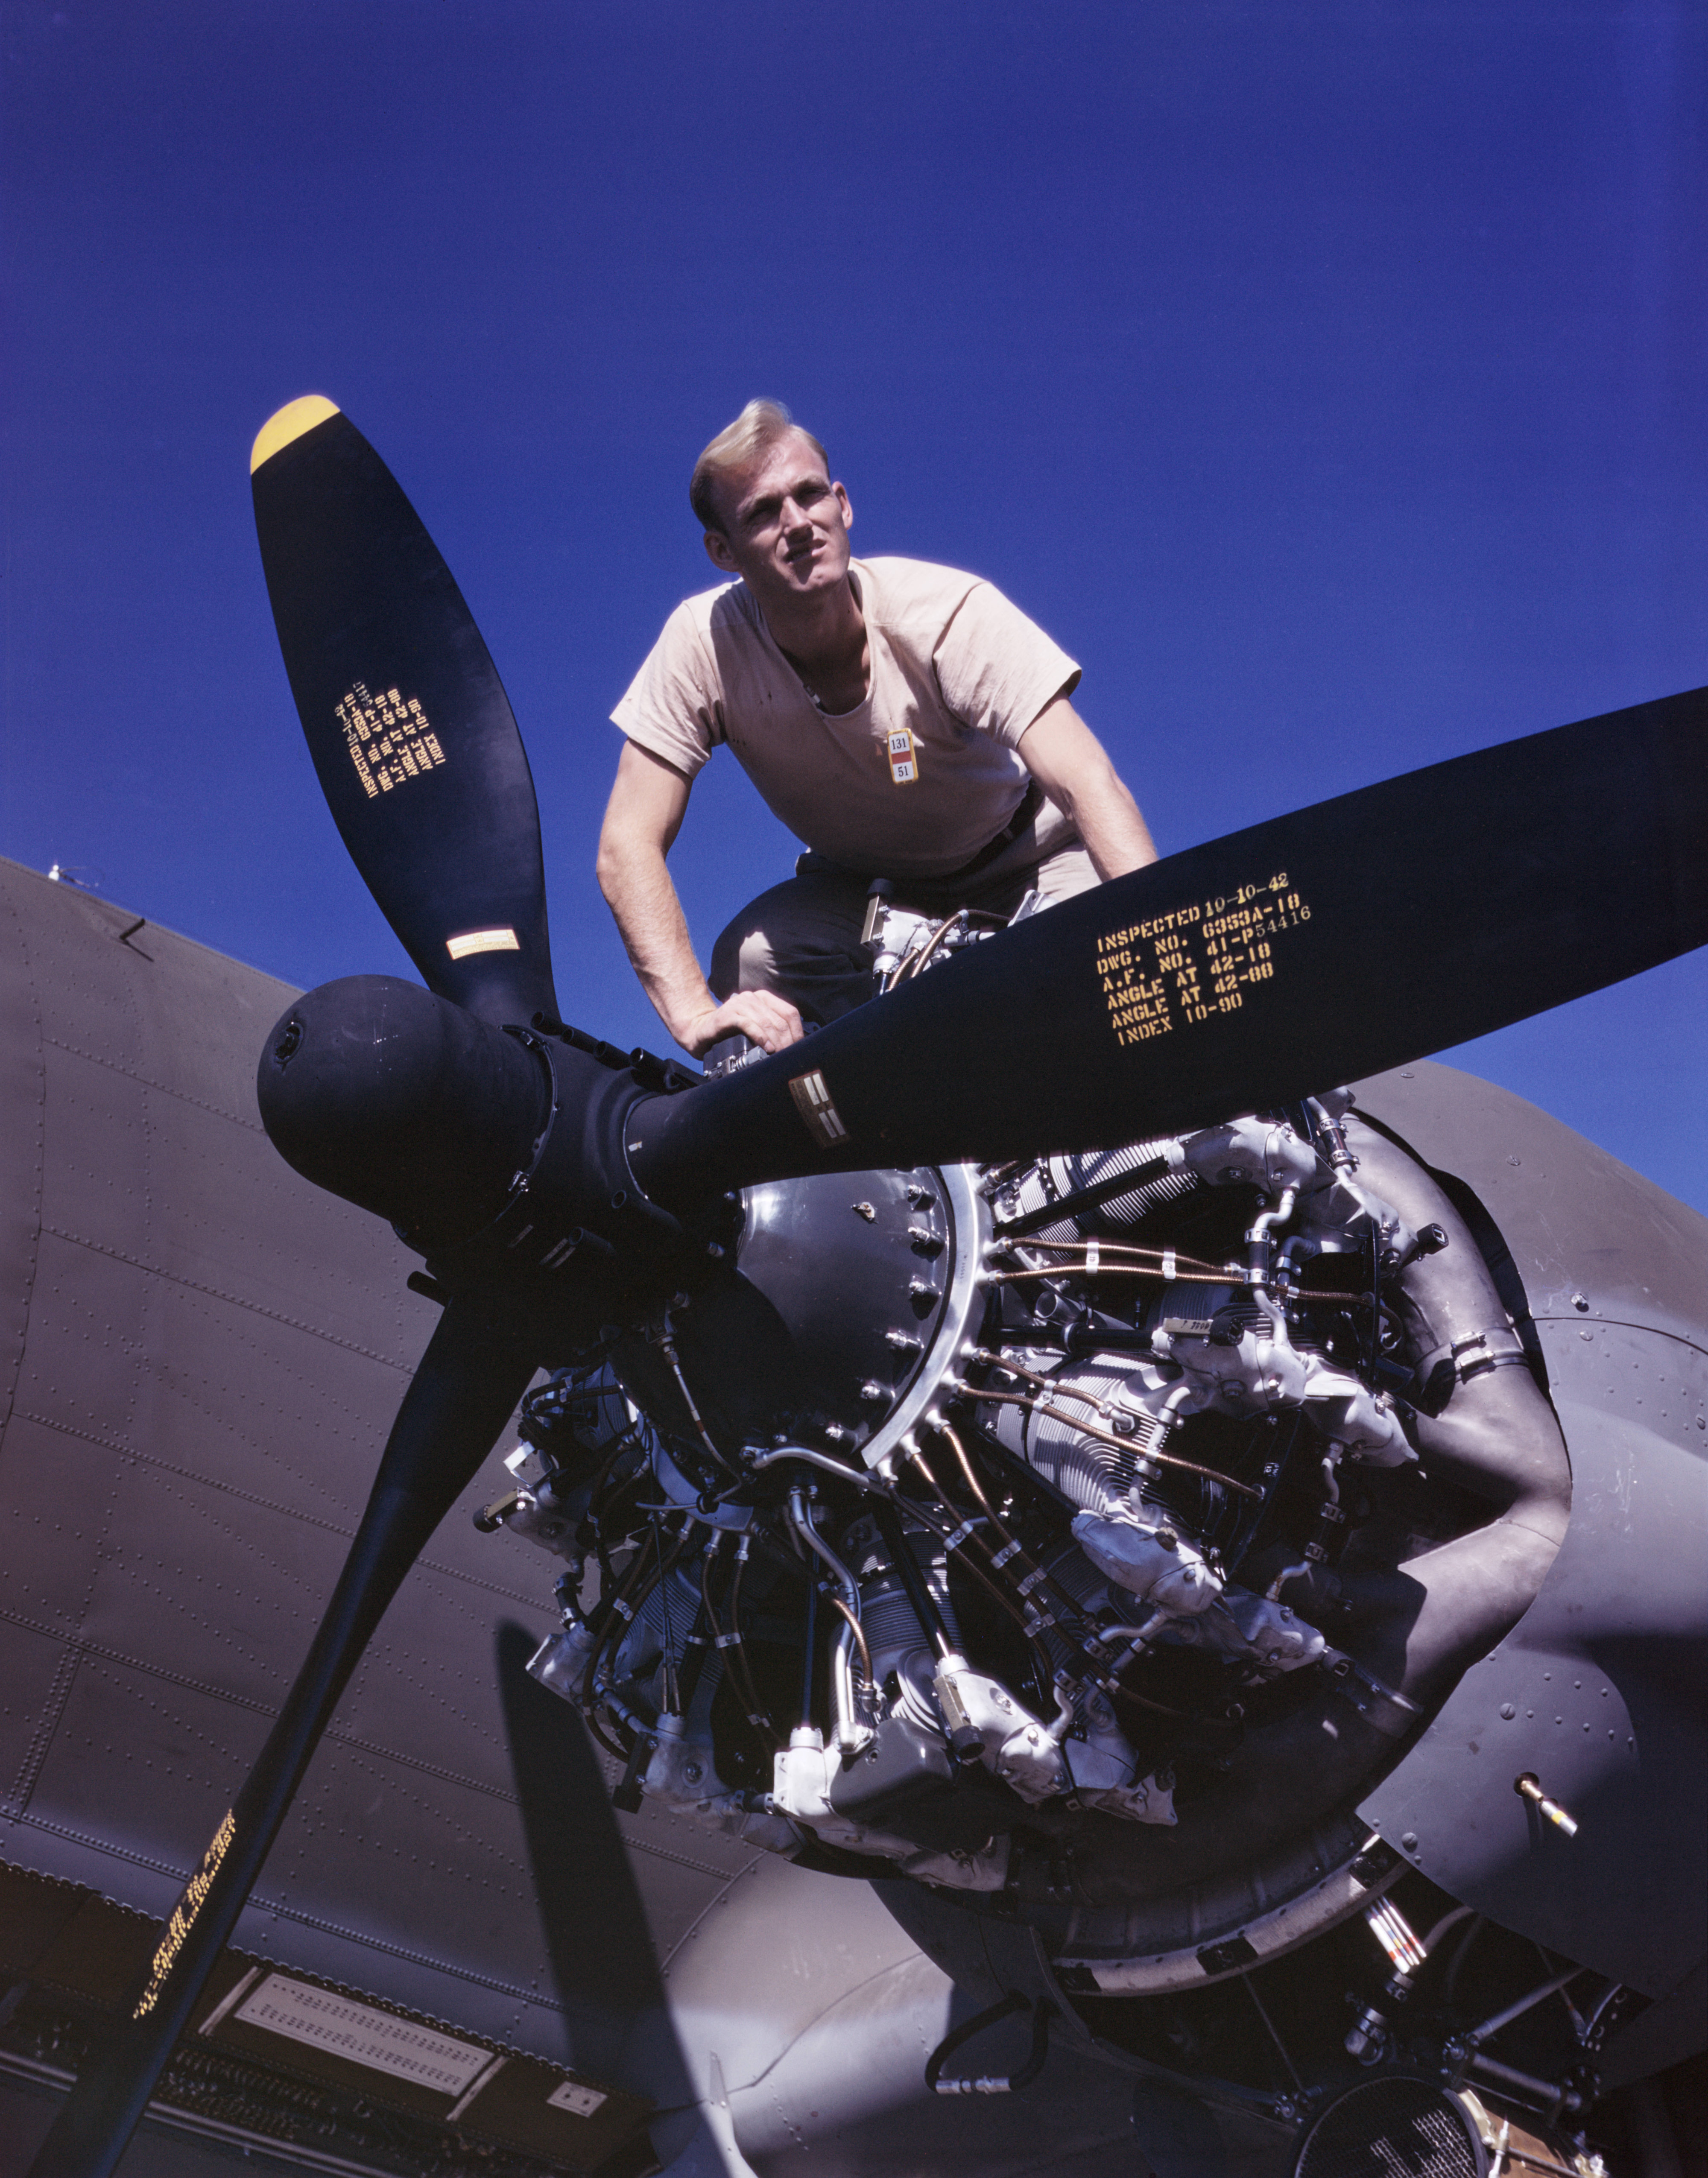 Douglas Aircraft Company employee working on the port engine of a C-47 Skytrain aircraft, Long Beach, California, United States, Oct 1942